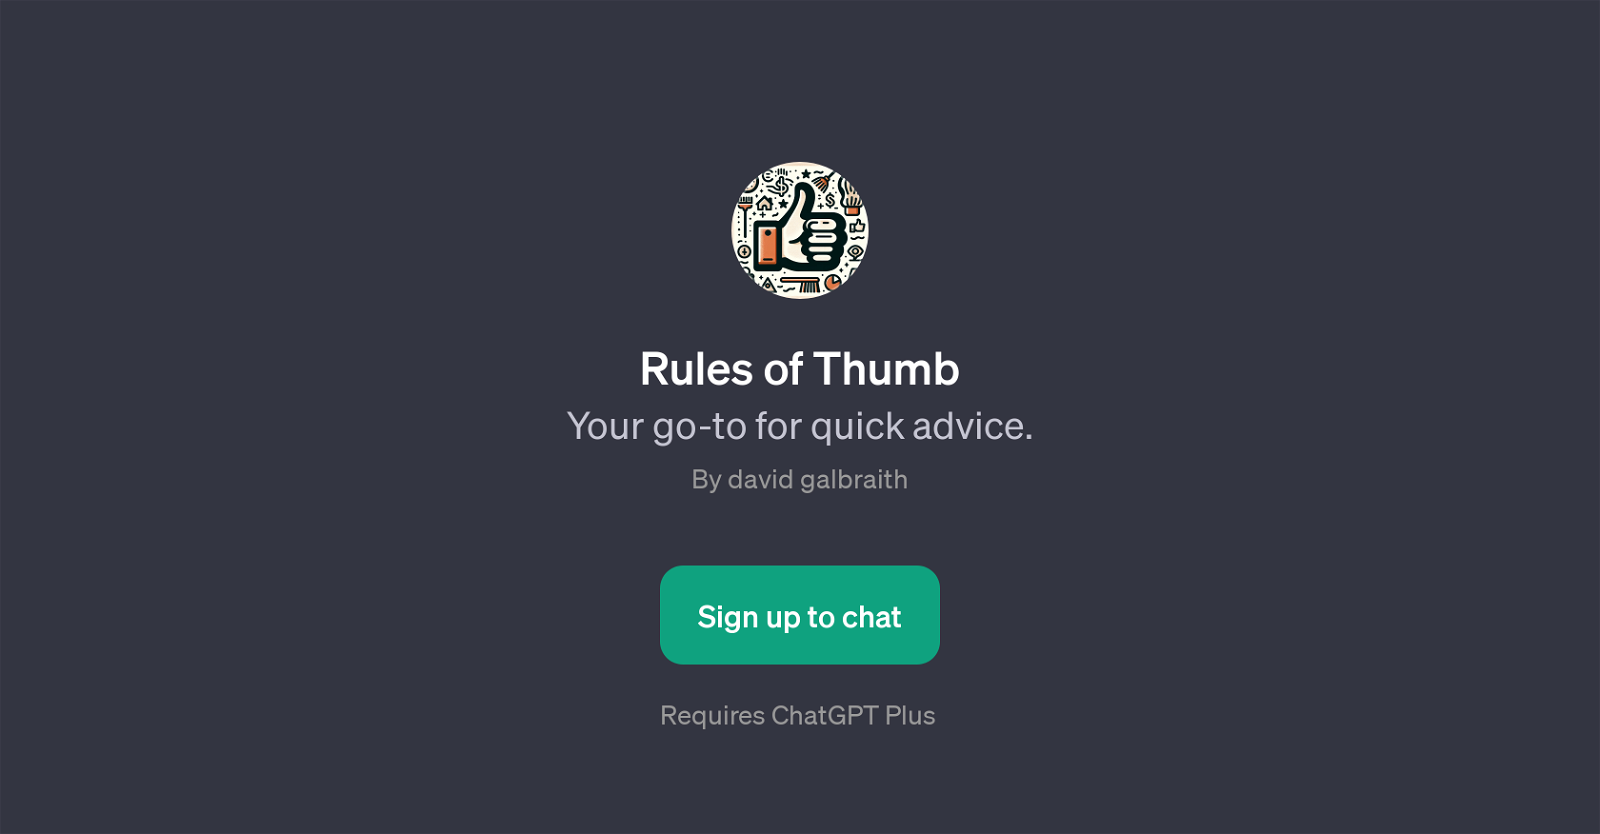 Rules of Thumb website